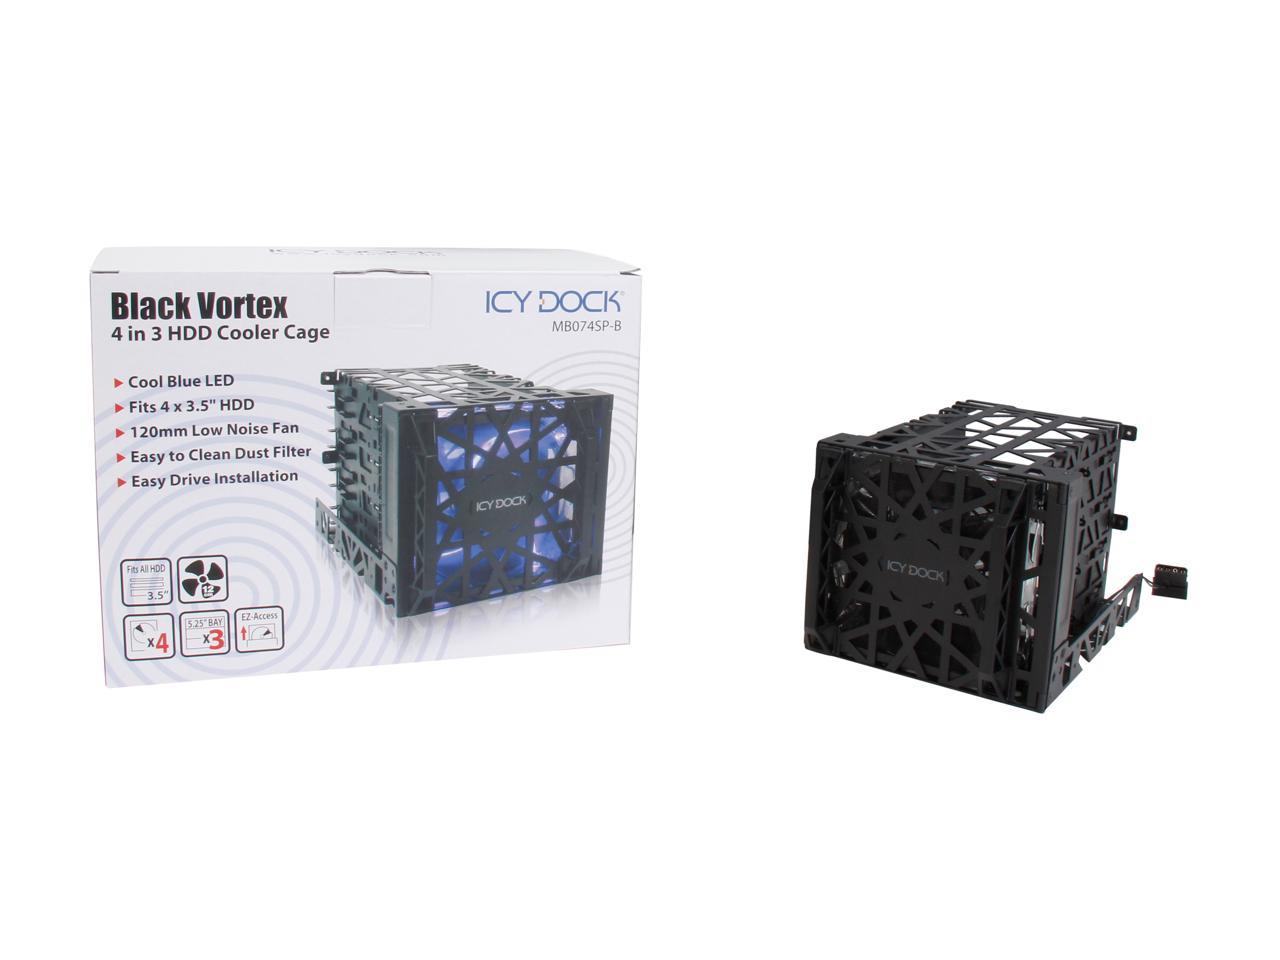 Icy Dock MB074SP-B Black Vortex Removable HDD 4 in 3 Module Cooler Cage